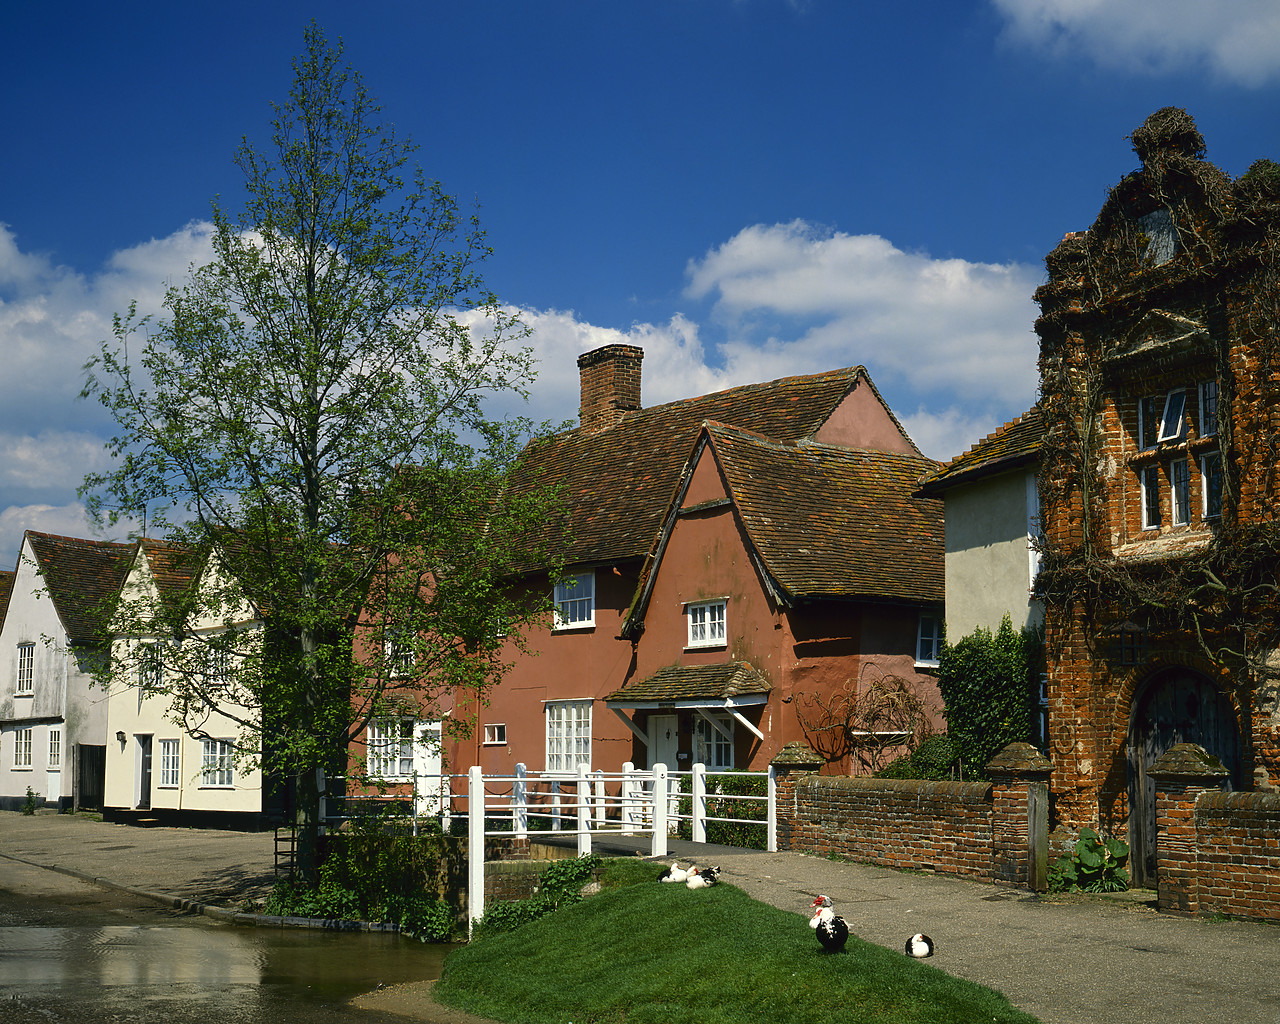 #892087-1 - Cottages & Ford, Kersey, Suffolk, England